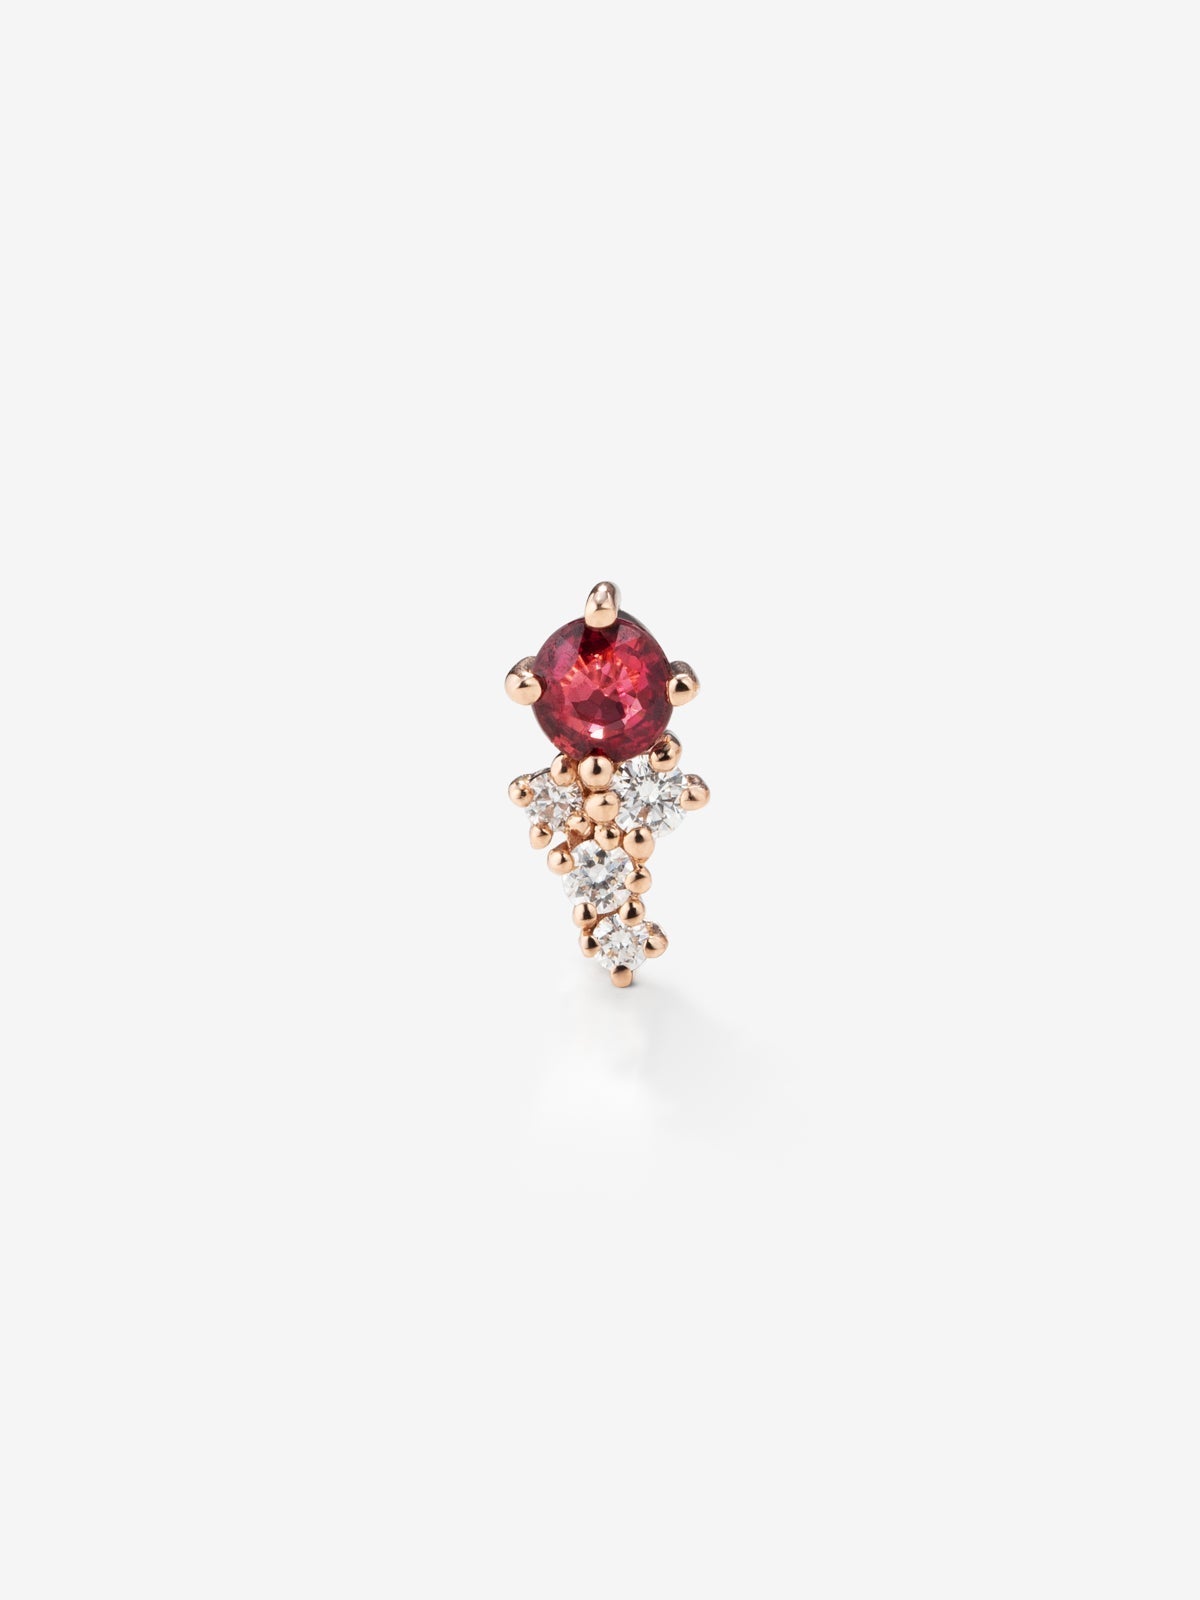 Individual left earring in 18K rose gold with ruby and diamonds